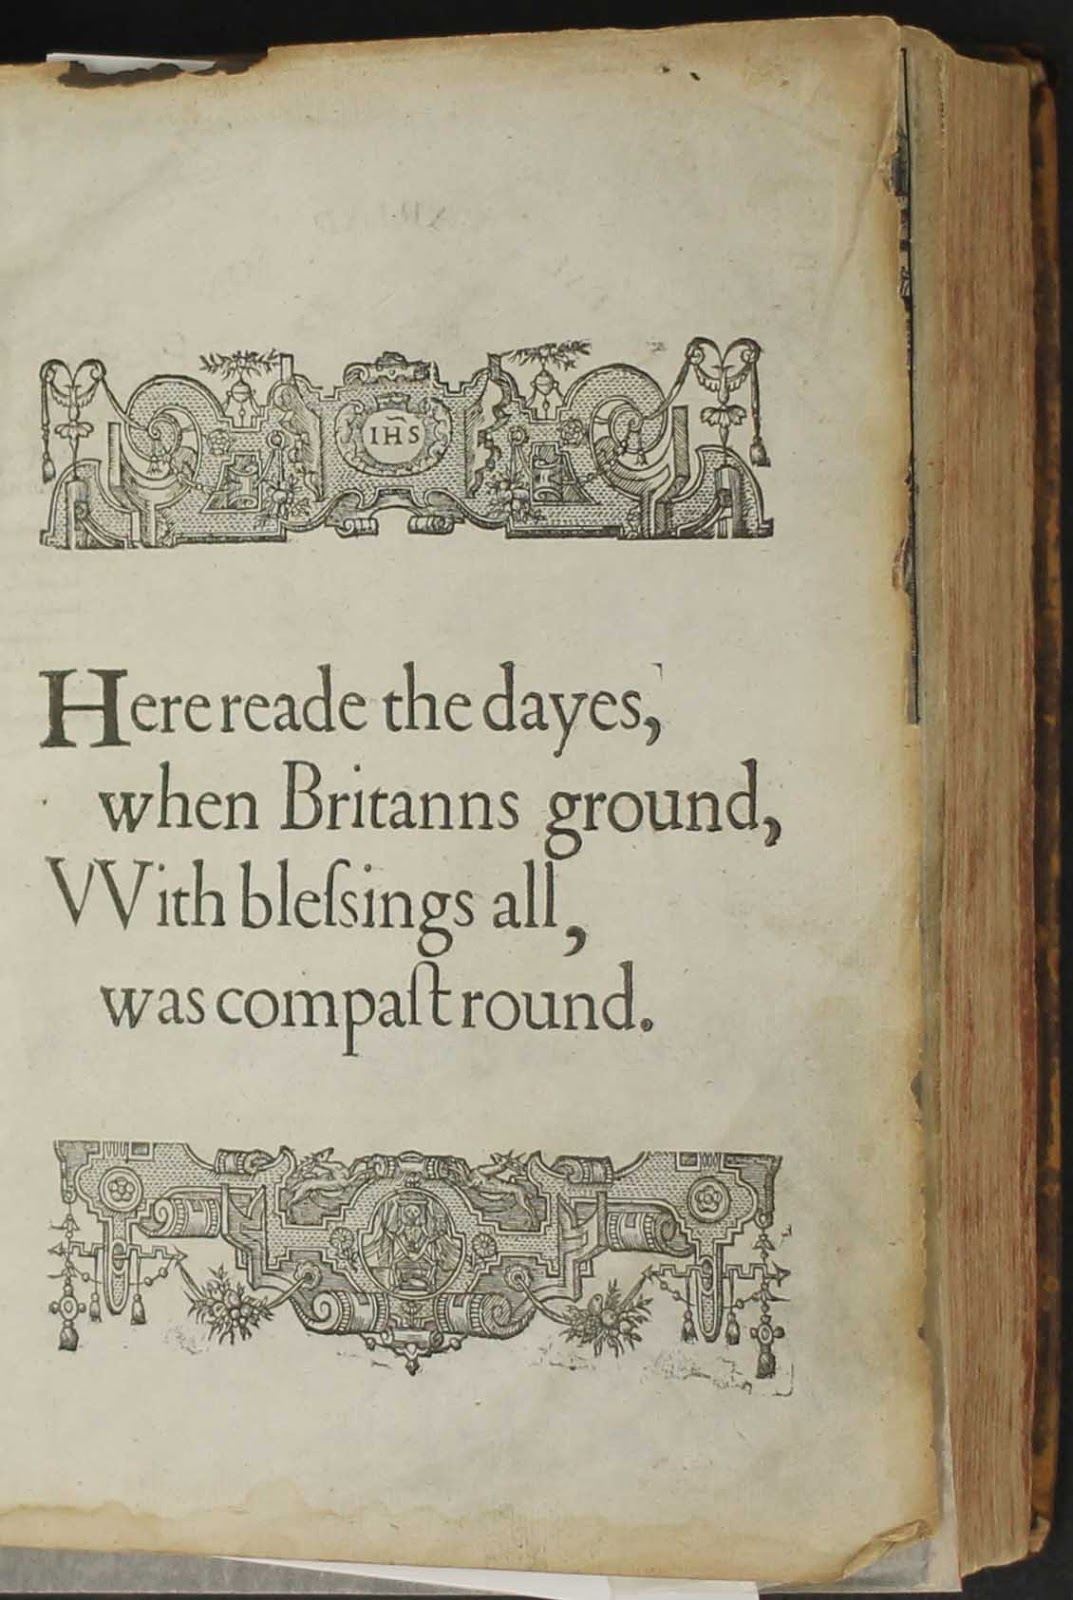 Here reade the dayes, when Britanns ground, with blessings all, was compast round. with ornate illustrations